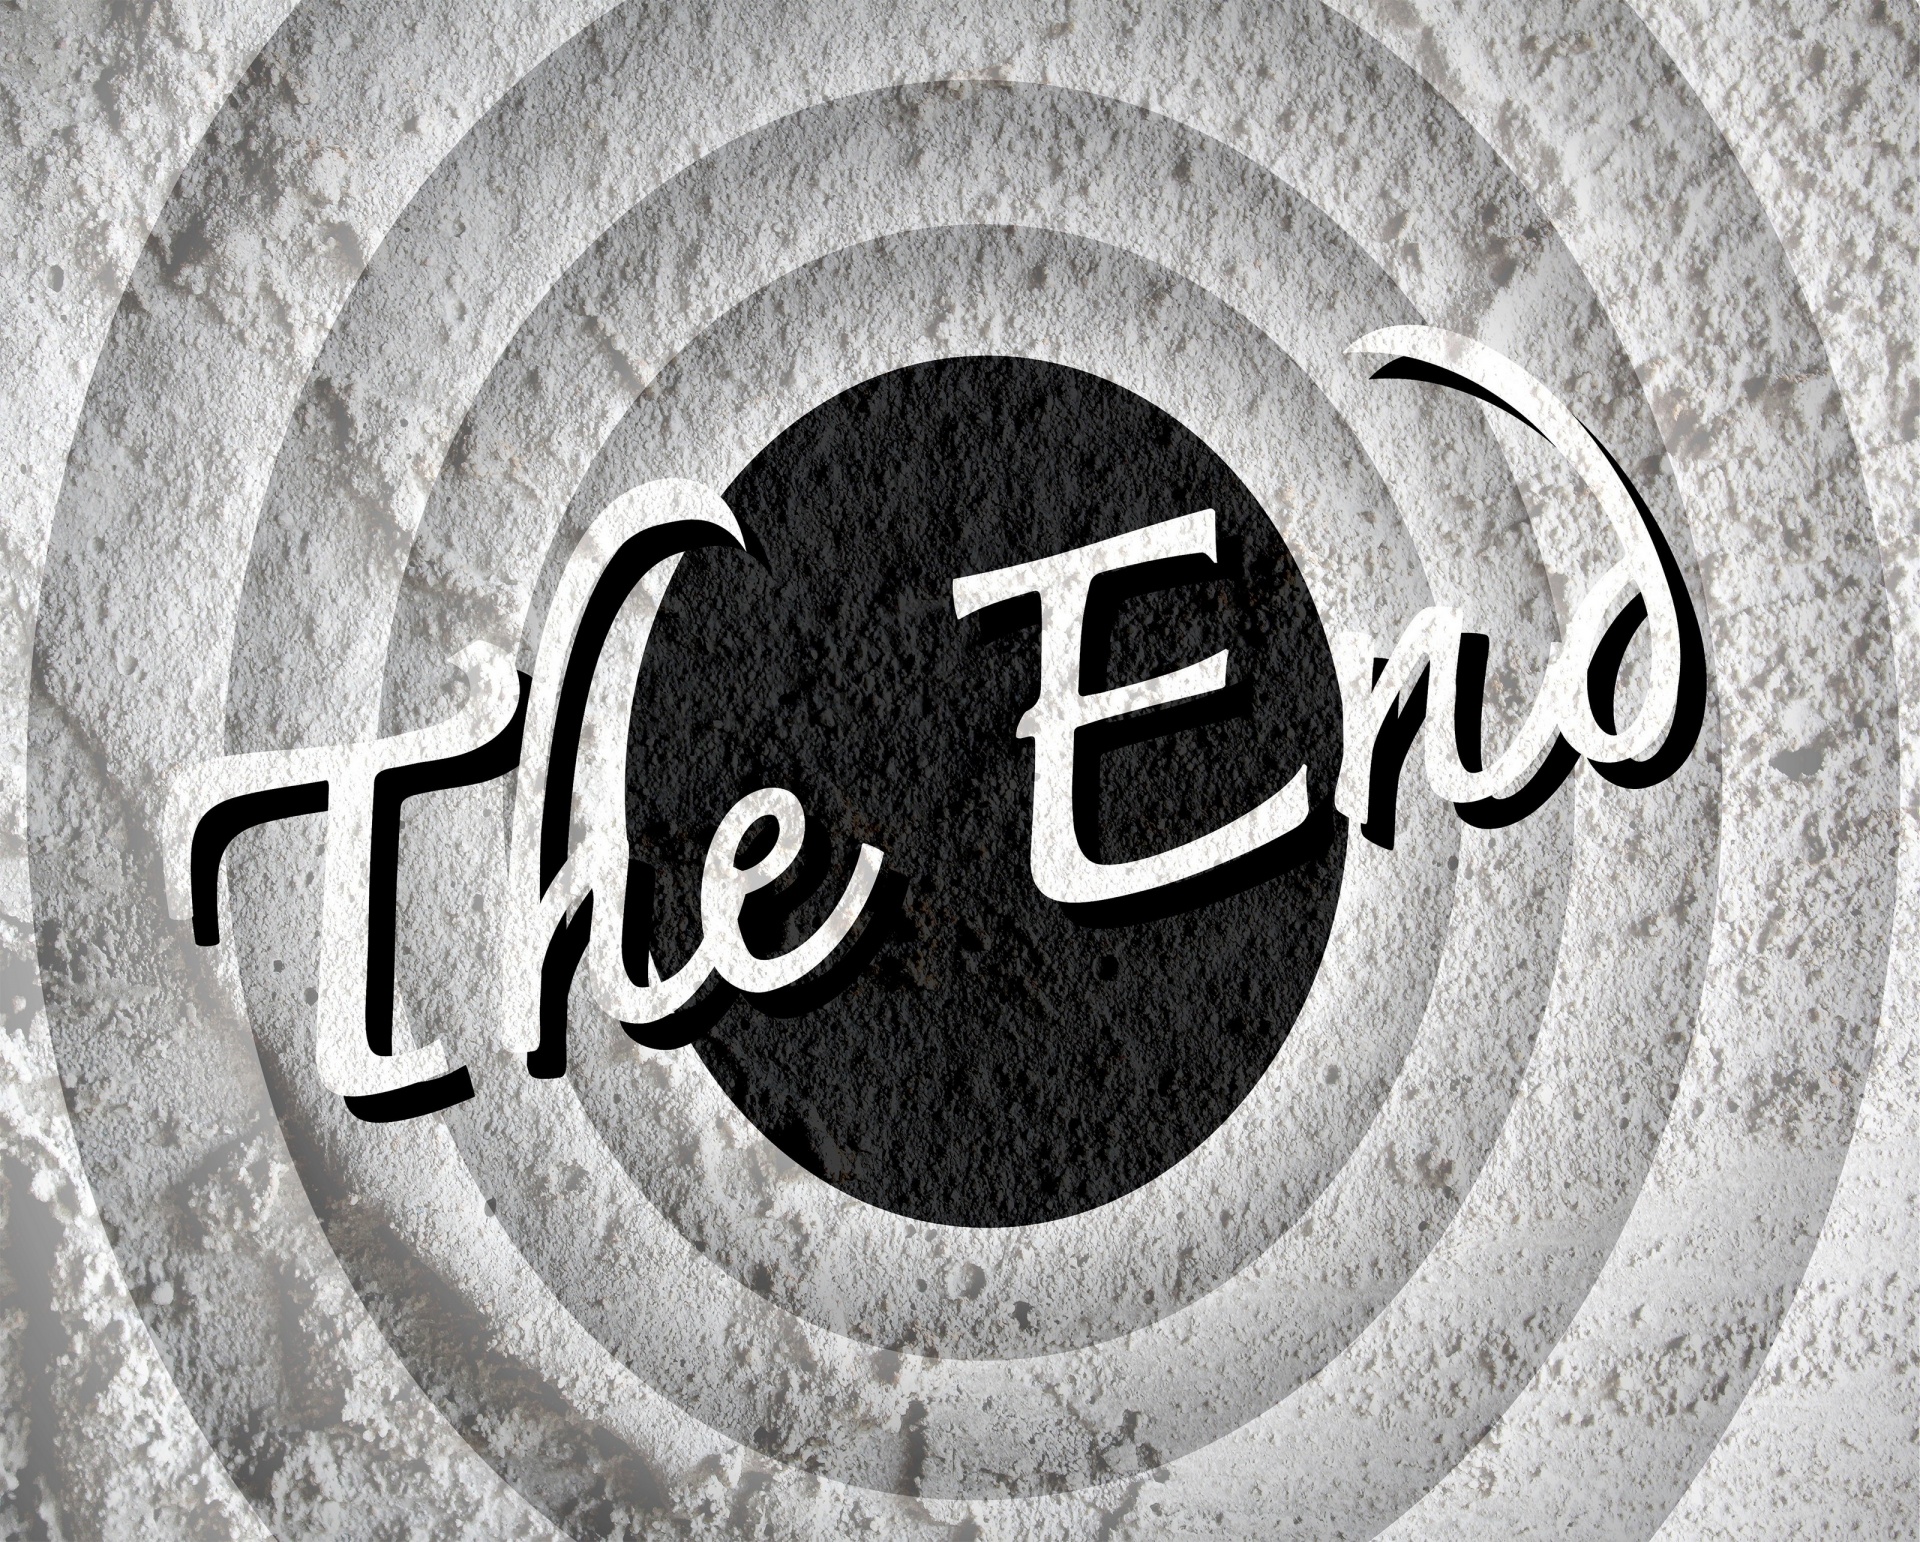 The End Movie Ending Screen On Cement